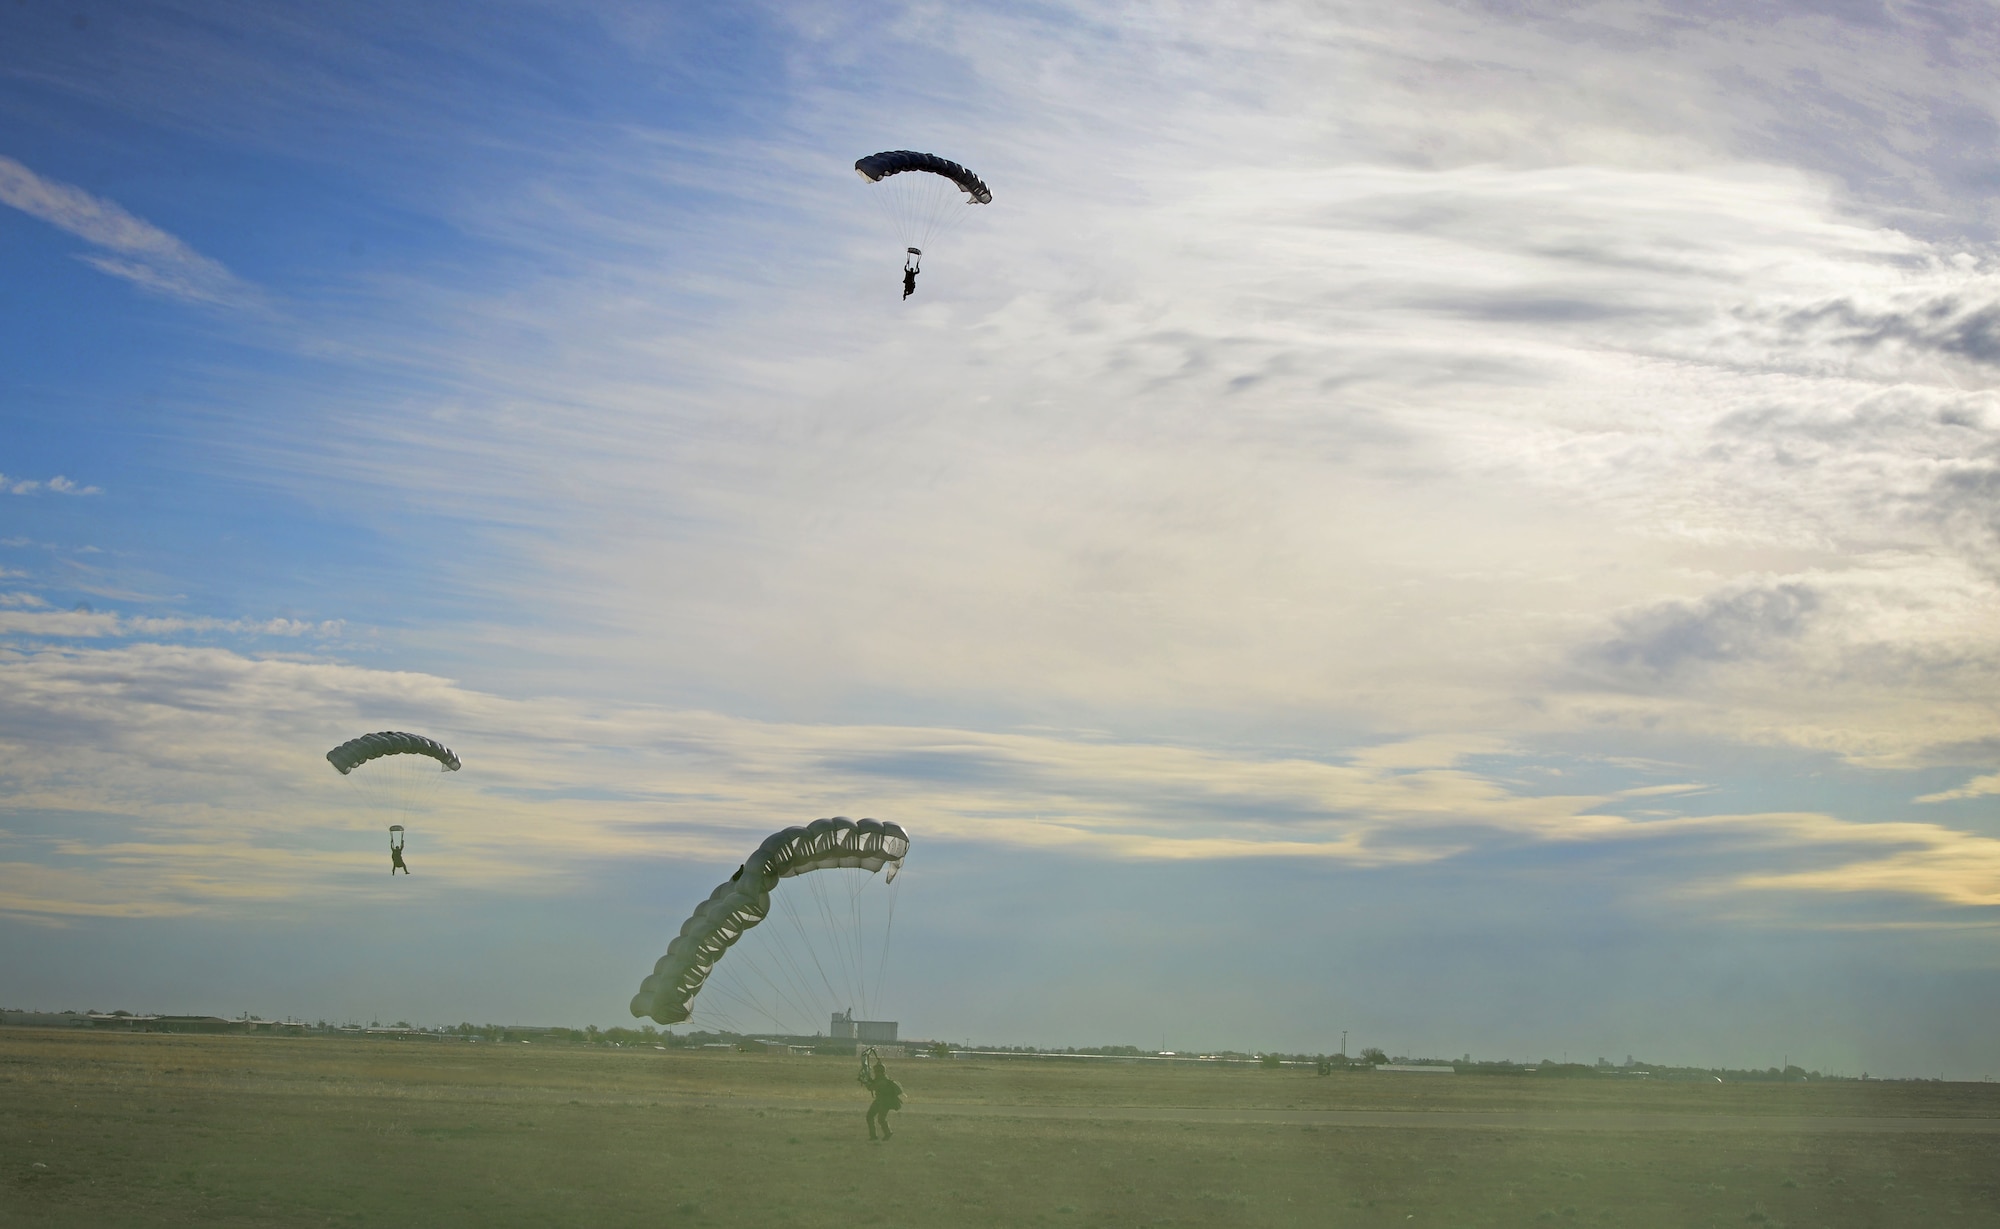 Several 26th Special Tactics Squadron members approach their final touch-down onto a landing zone March 25, 2016, at Cannon Air Force Base, N.M. Air Commandos with the 26th STS performed routine practice jumps as part of maintaining operational readiness. (U.S. Air Force photo/Staff Sgt. Alexx Pons) 